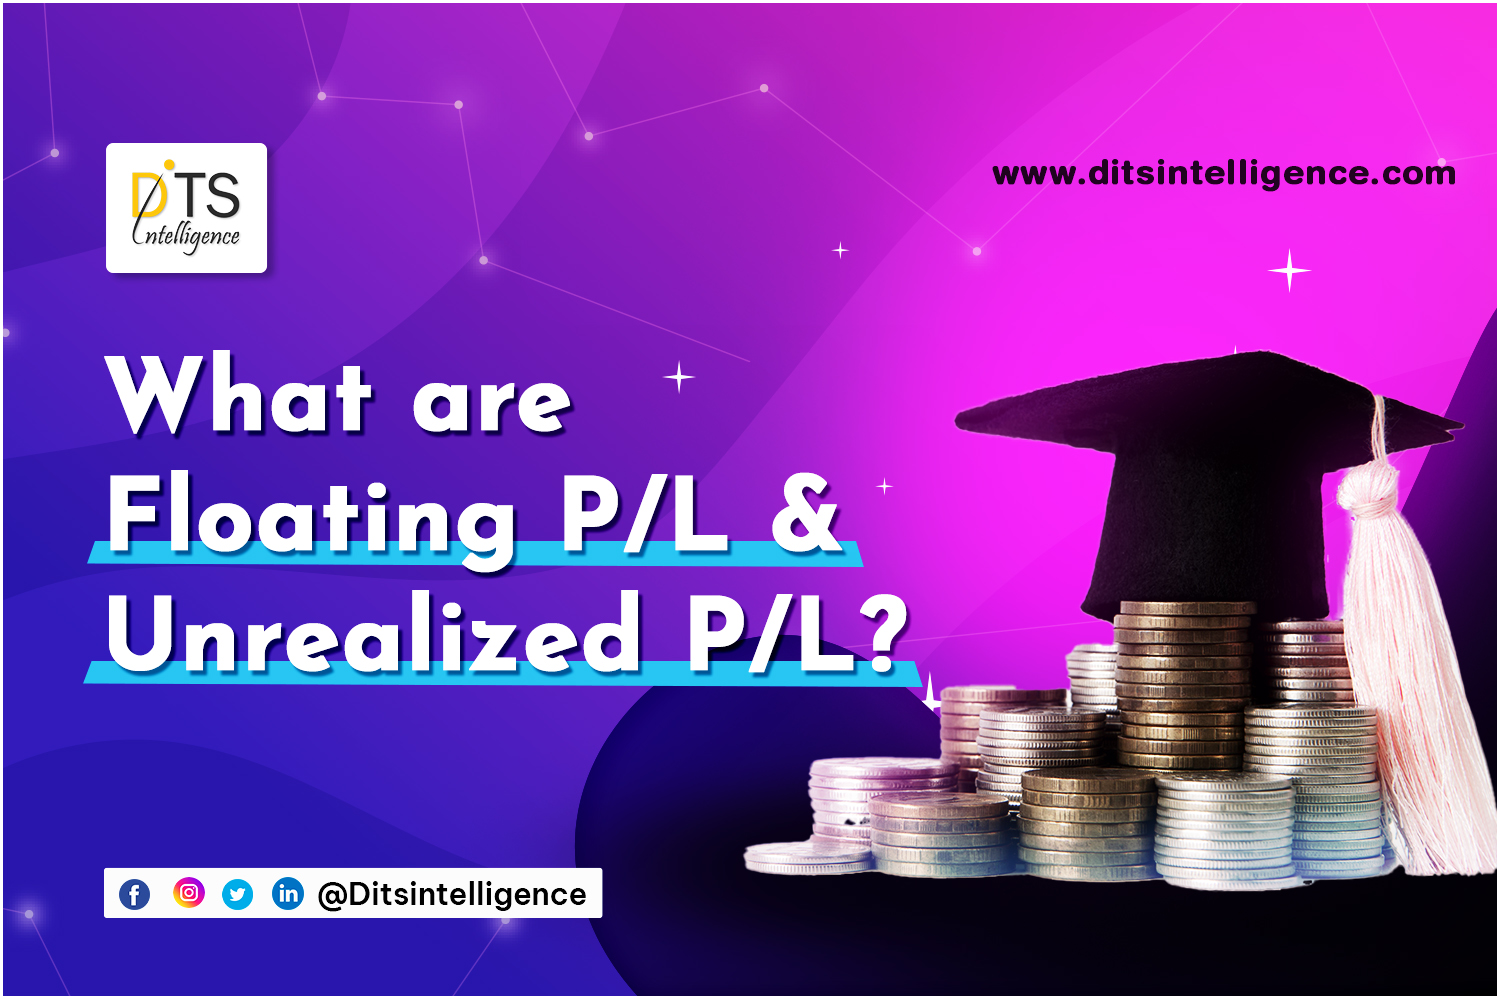 What are Floating P/L and Unrealized P/L?